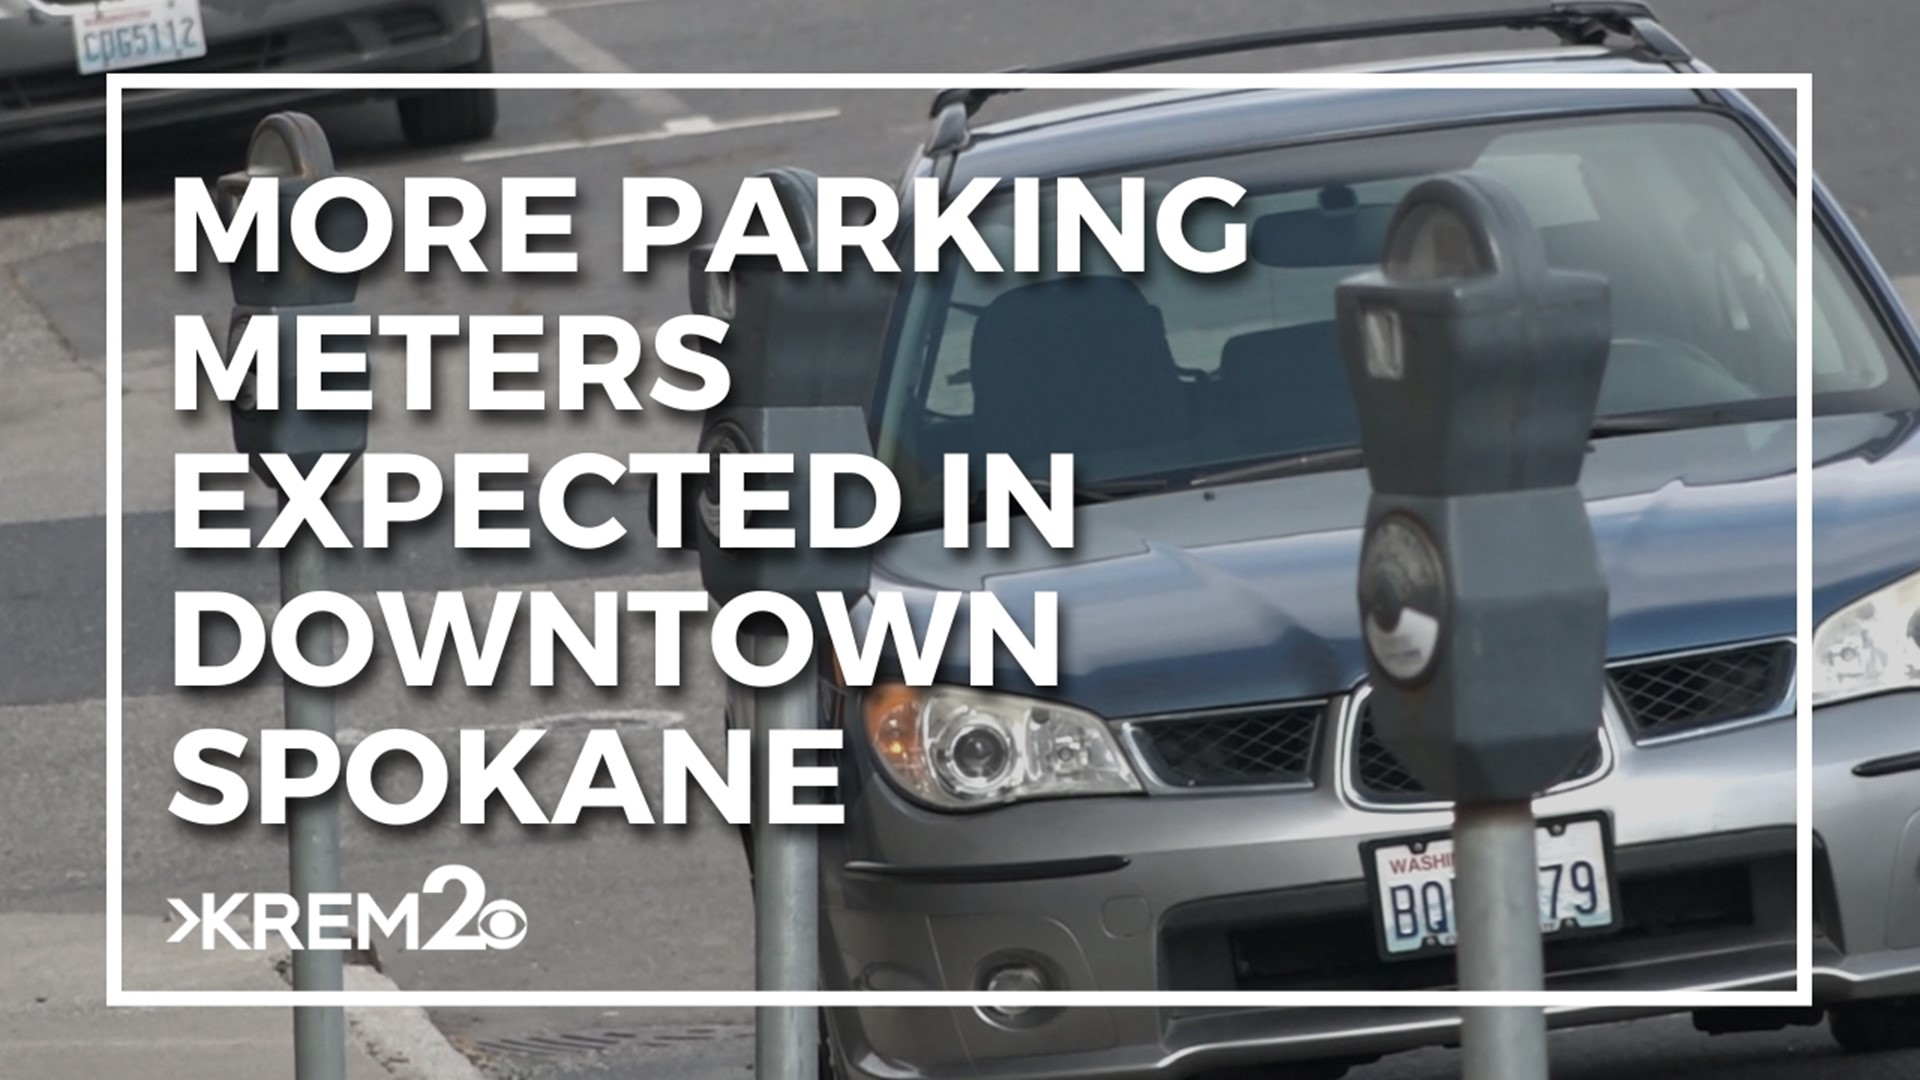 Last week, Spokane City Council approved a $1.8 million contract to create new parking meters downtown. The contract will help purchase 880 new meters.